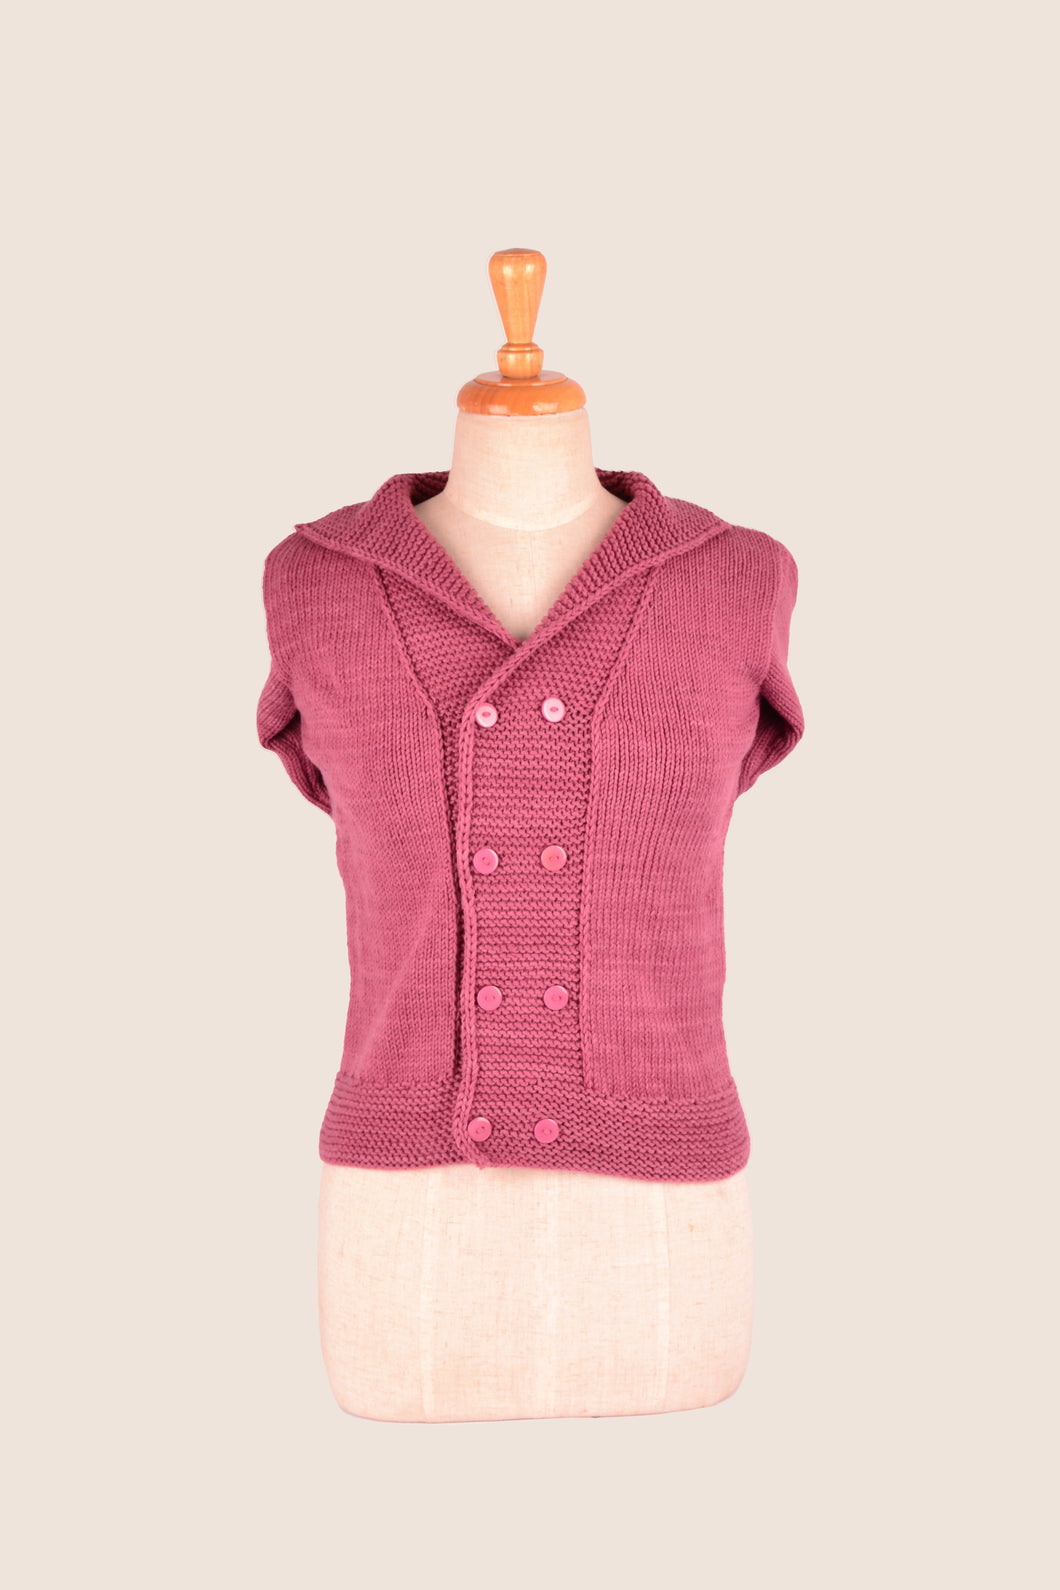 Dusty Pink 1950's Vogue Cardigan